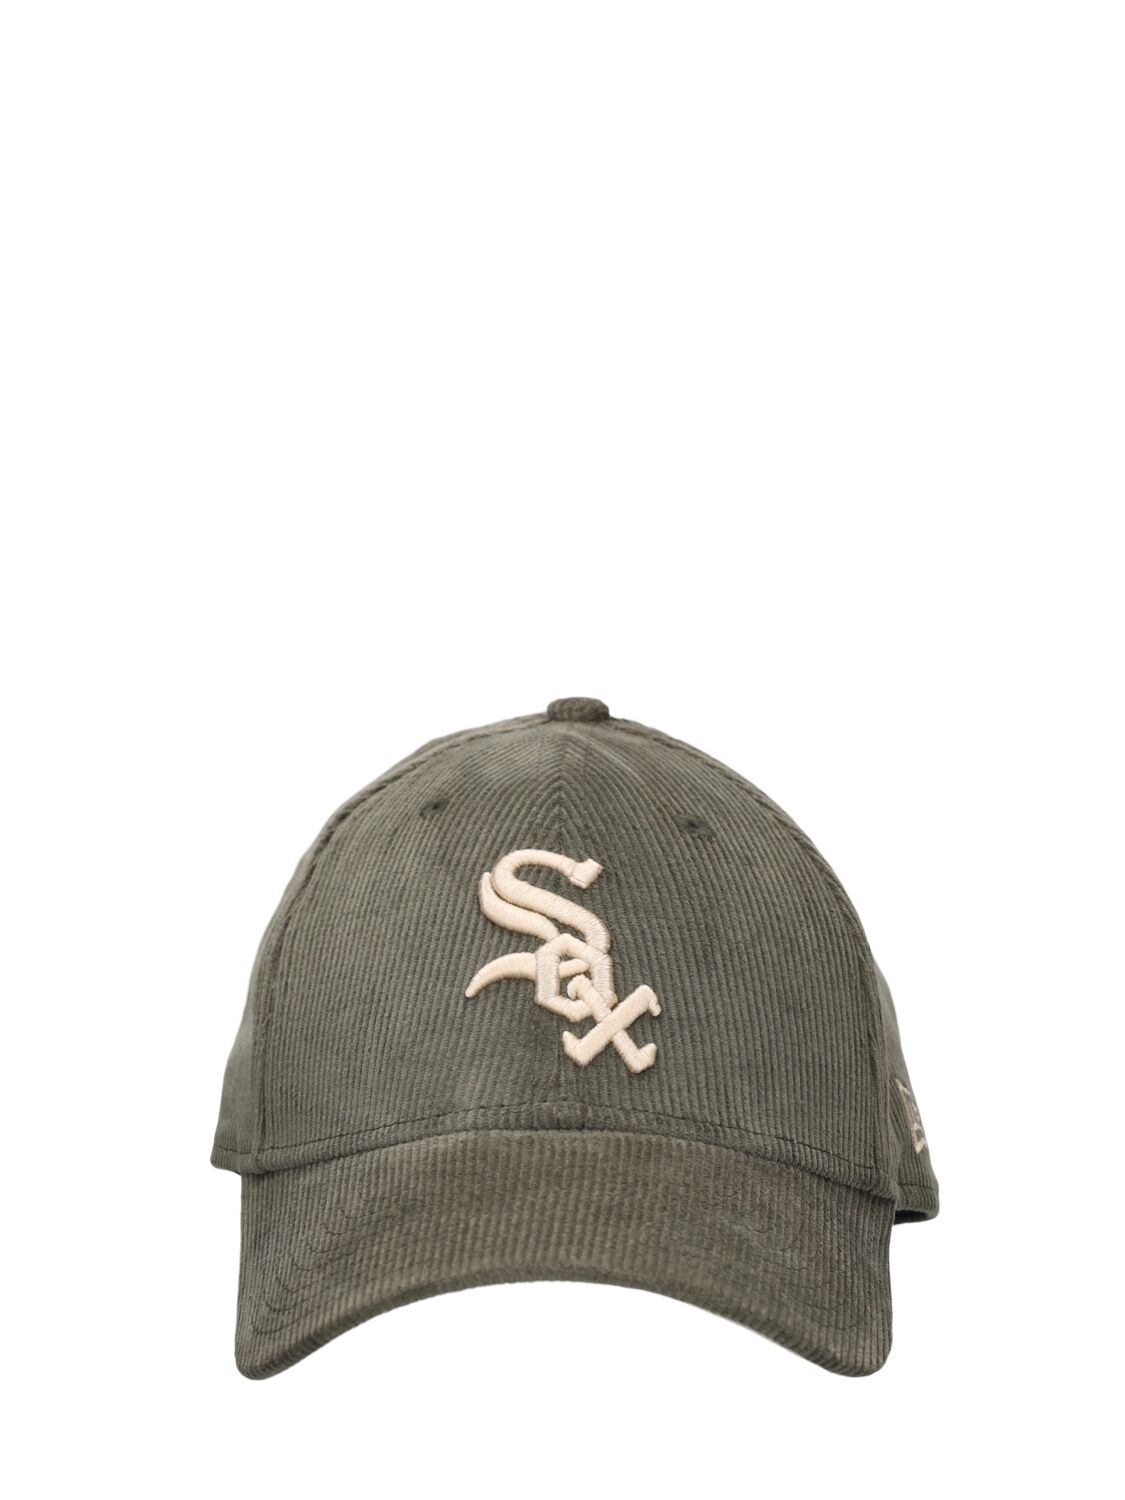 Image of Chicago White Sox 9forty Cap